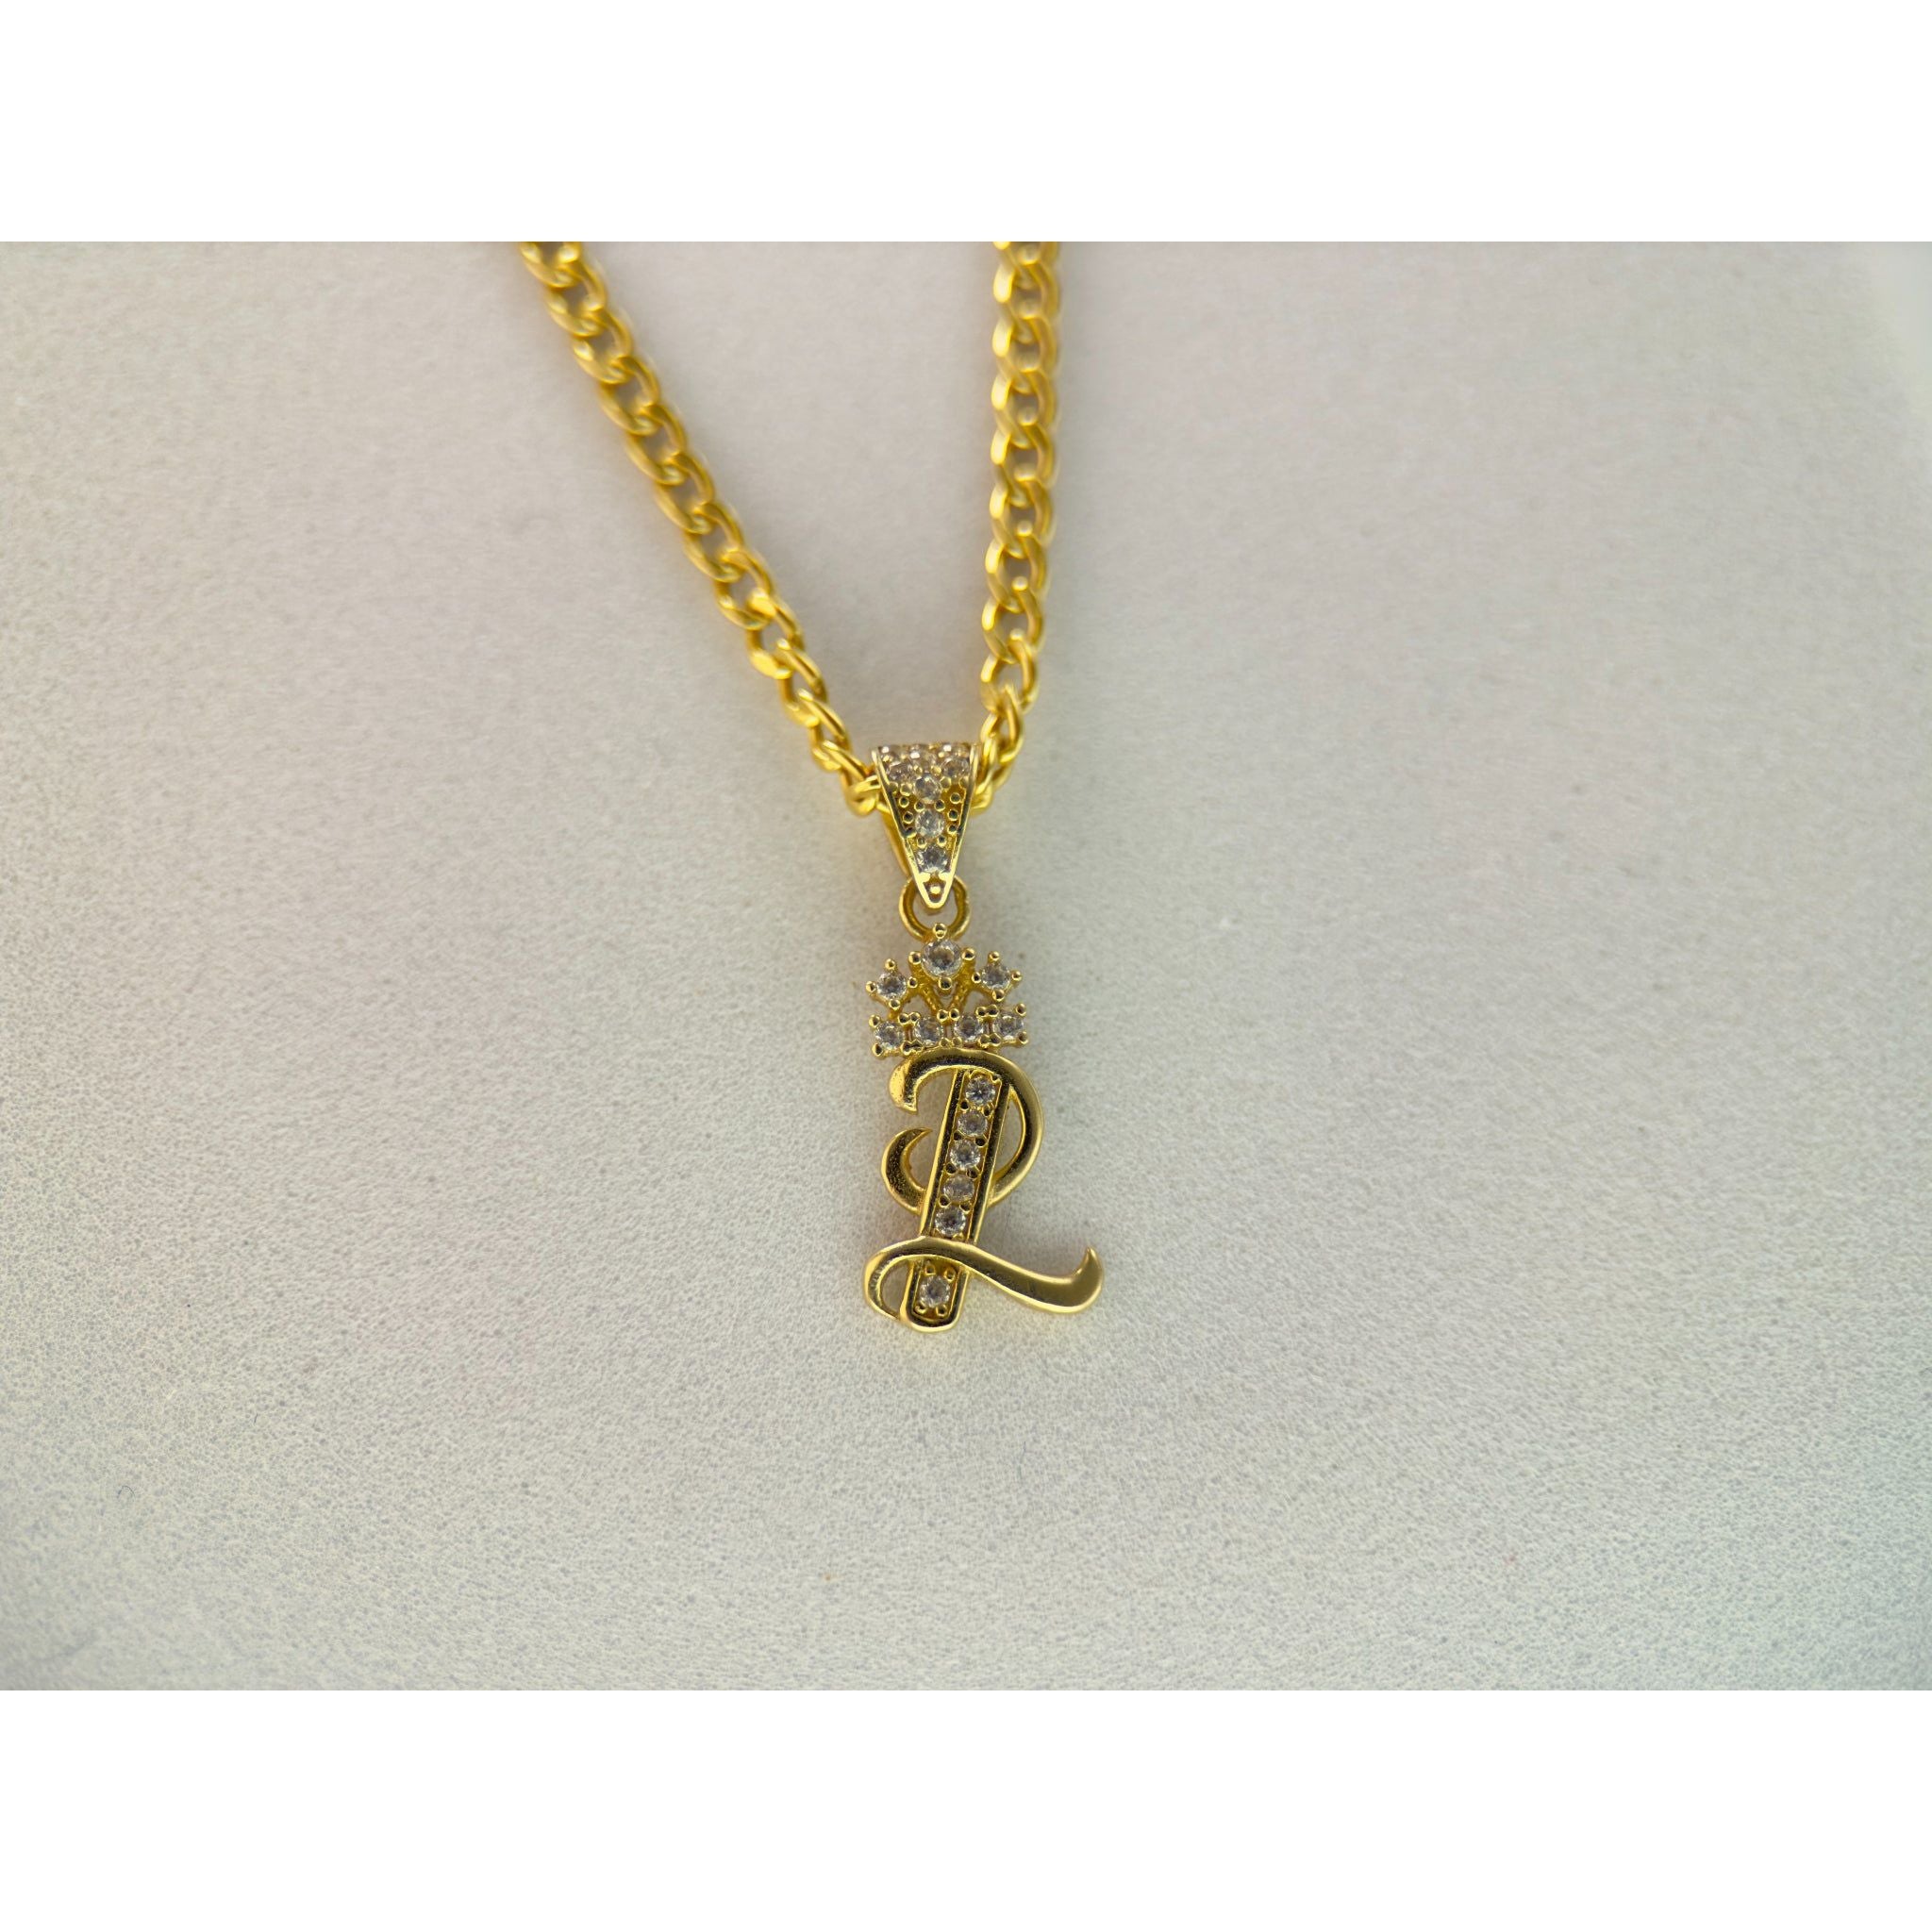 DR1936 - 10K Yellow Gold - Lab Created Stones - Gold Chain & Charm - Letter L w/Crown